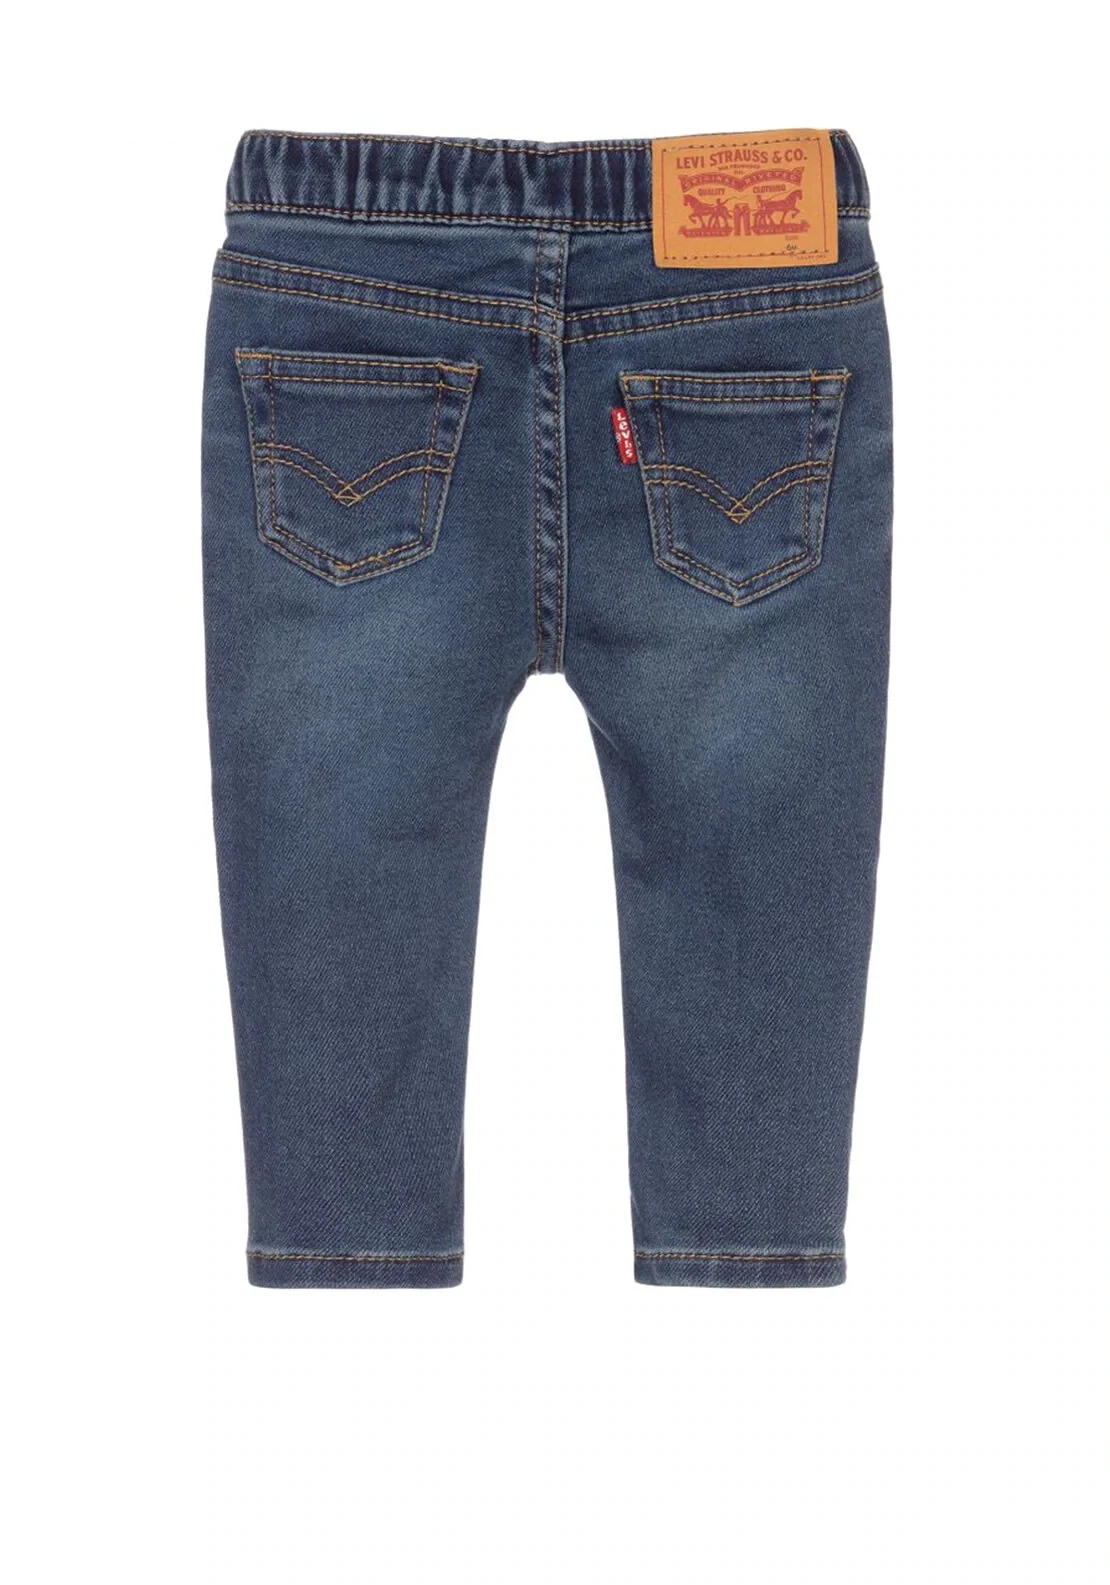 Levis Baby Boys Skinny Taper Pull On Jean, Tambourine Blue - Baby Boys  Clothes: 3 - 24 mths - Kids 2 Teens